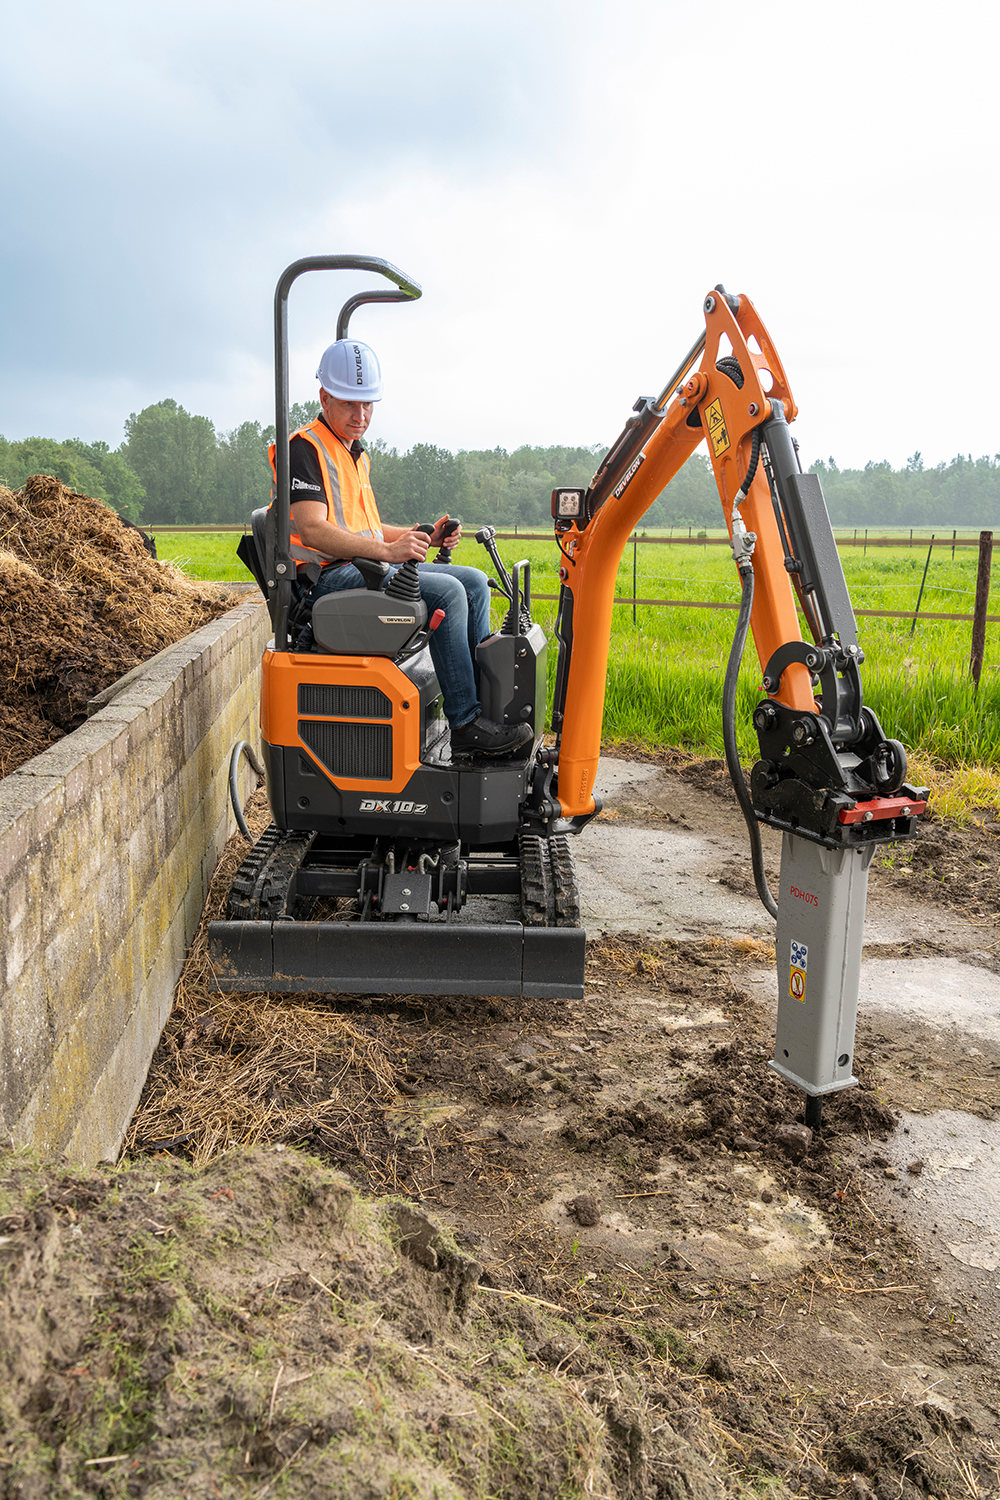 The new DX10Z-7 does not compromise on operator comfort and is ergonomically designed with the operator in mind